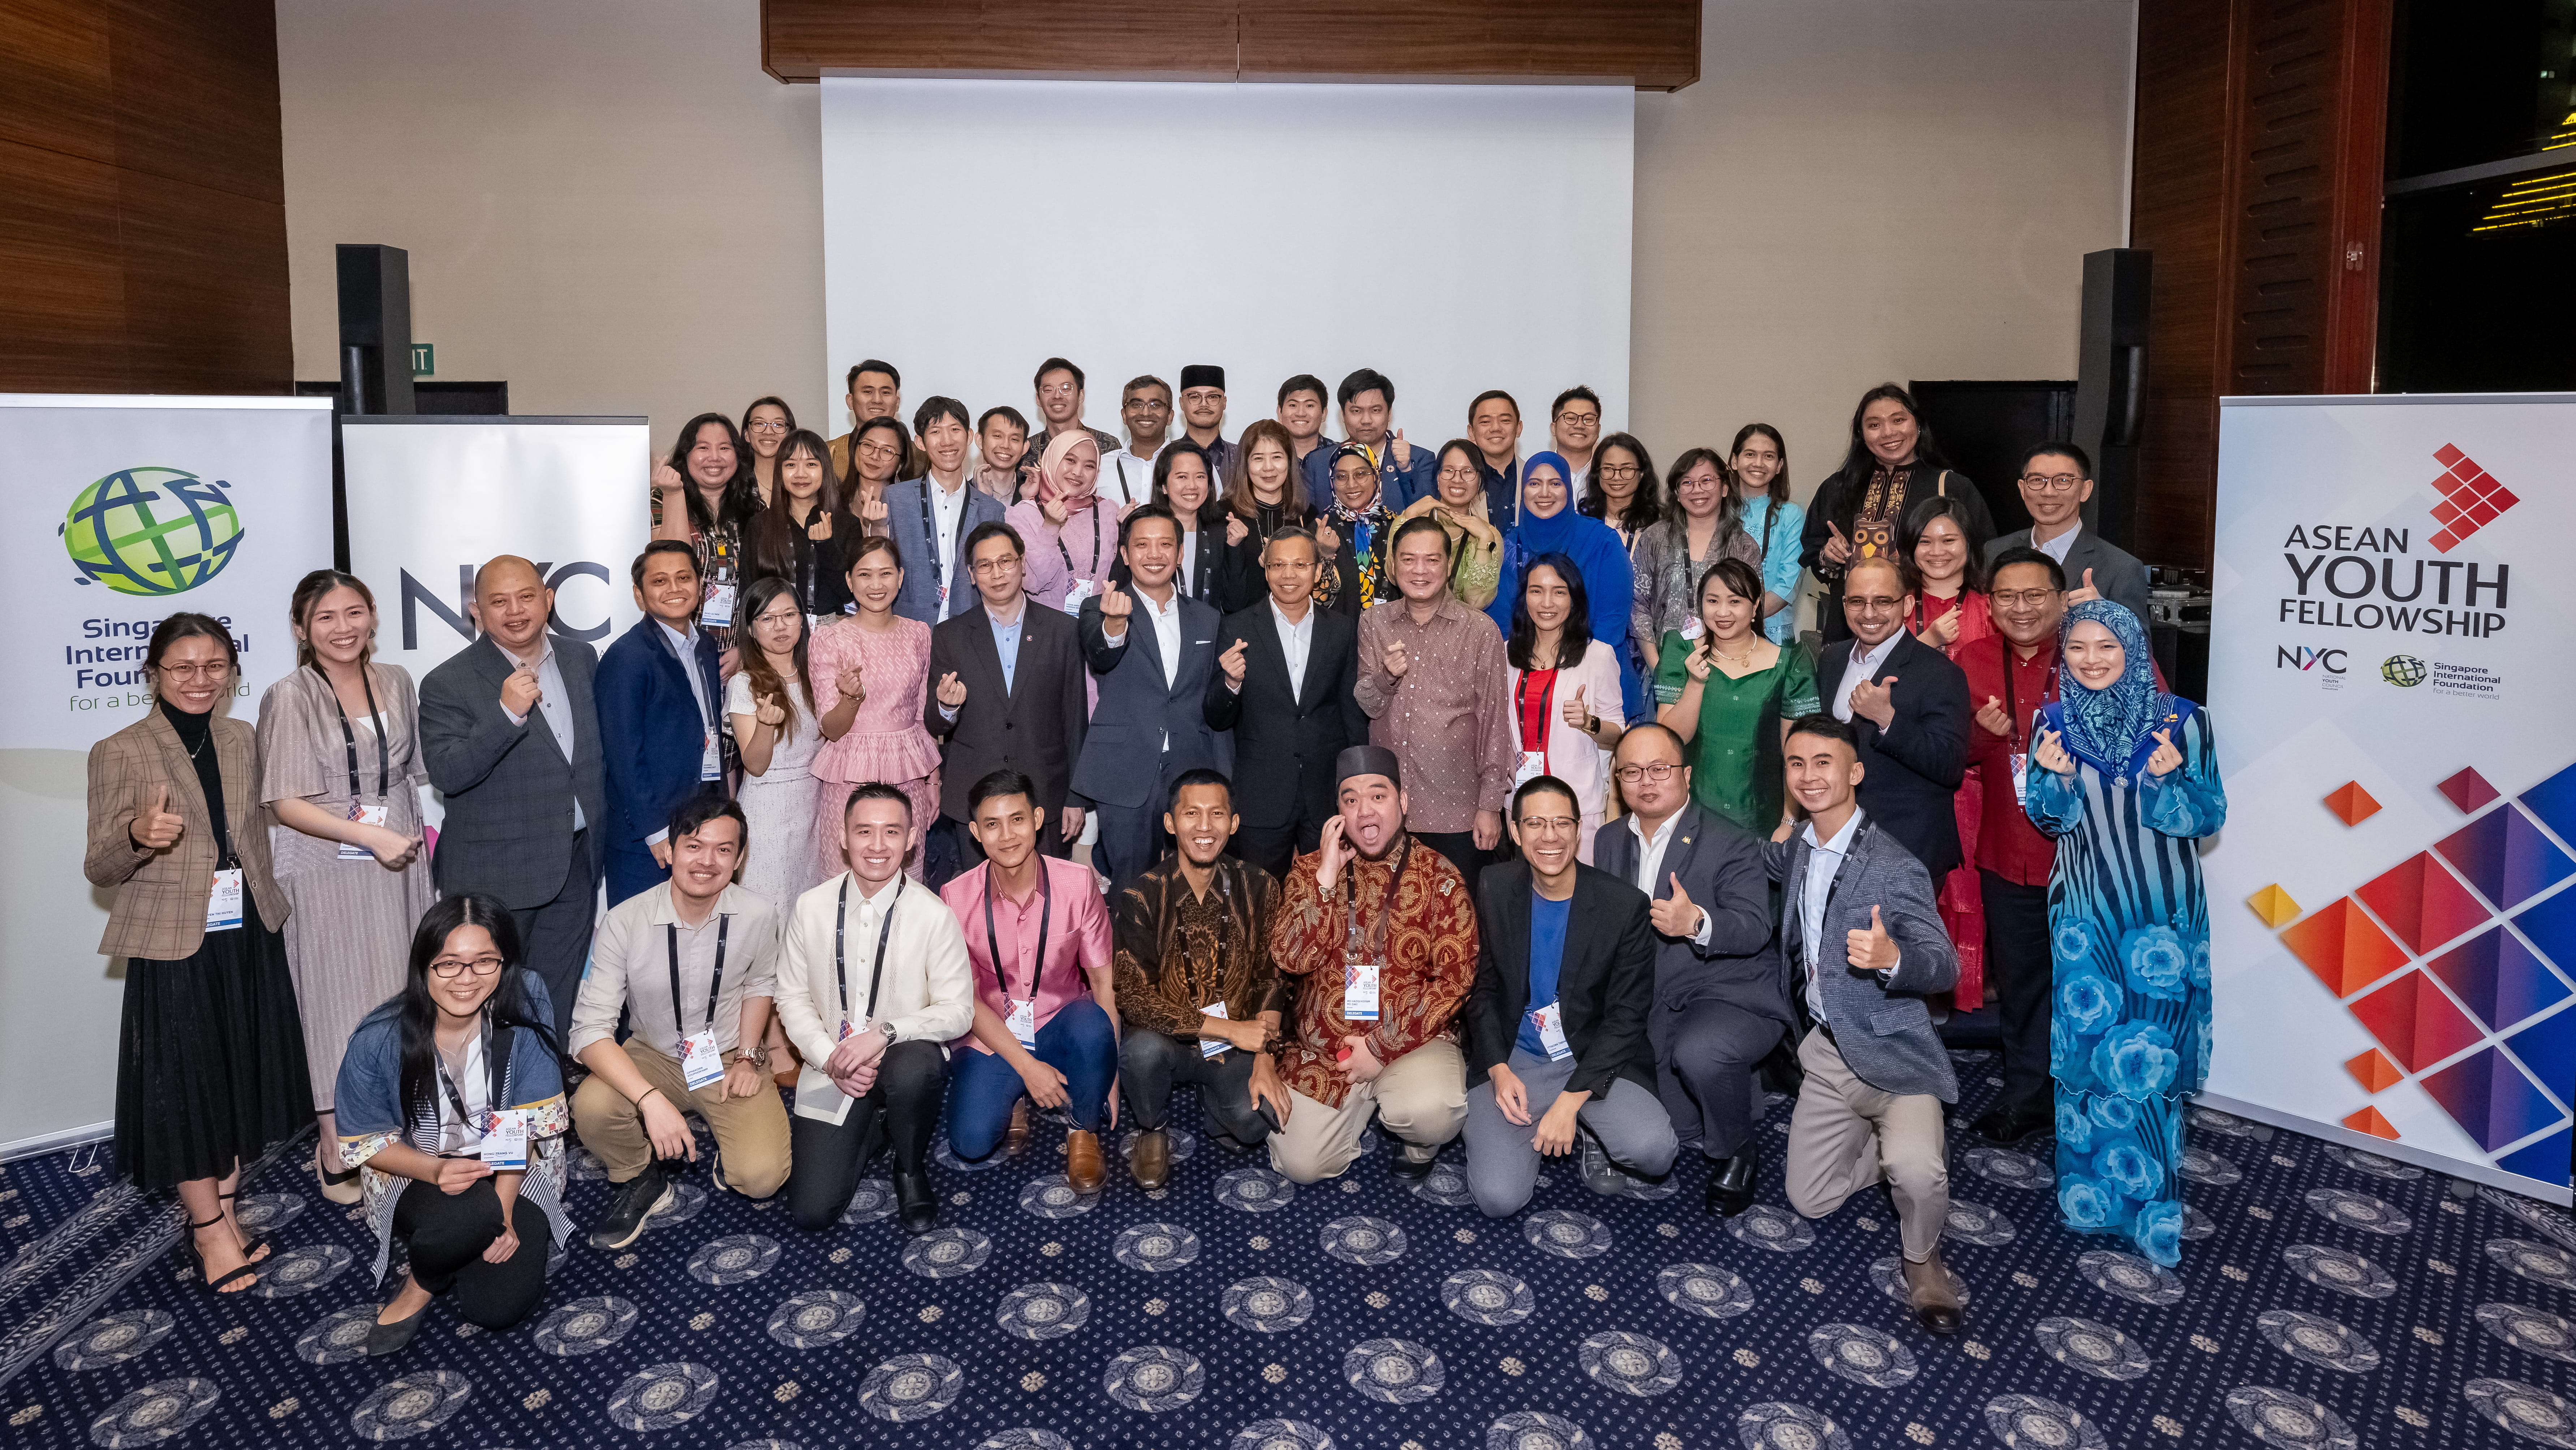 Group photo of ASEAN Youth Fellows with VIP guests at the welcome dinner in Singapore